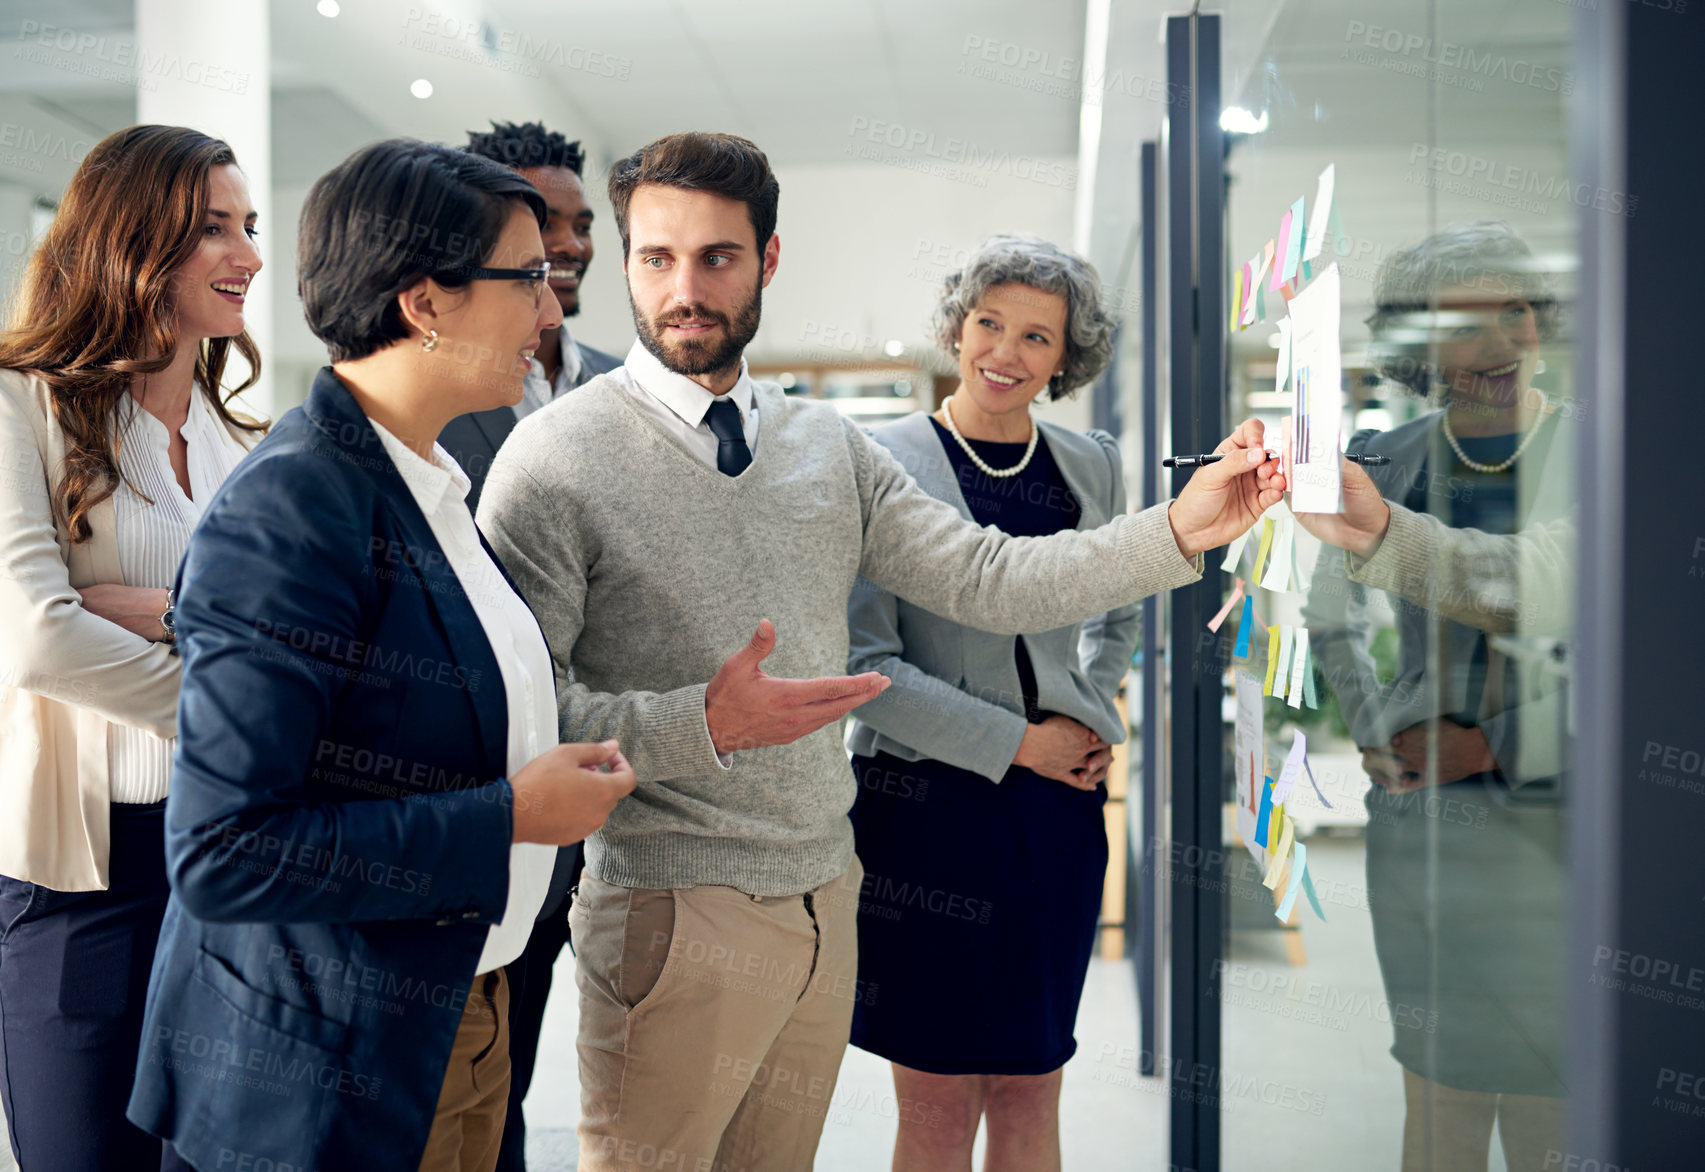 Buy stock photo Shot of a group of businesspeople brainstorming on a glass wall in an office